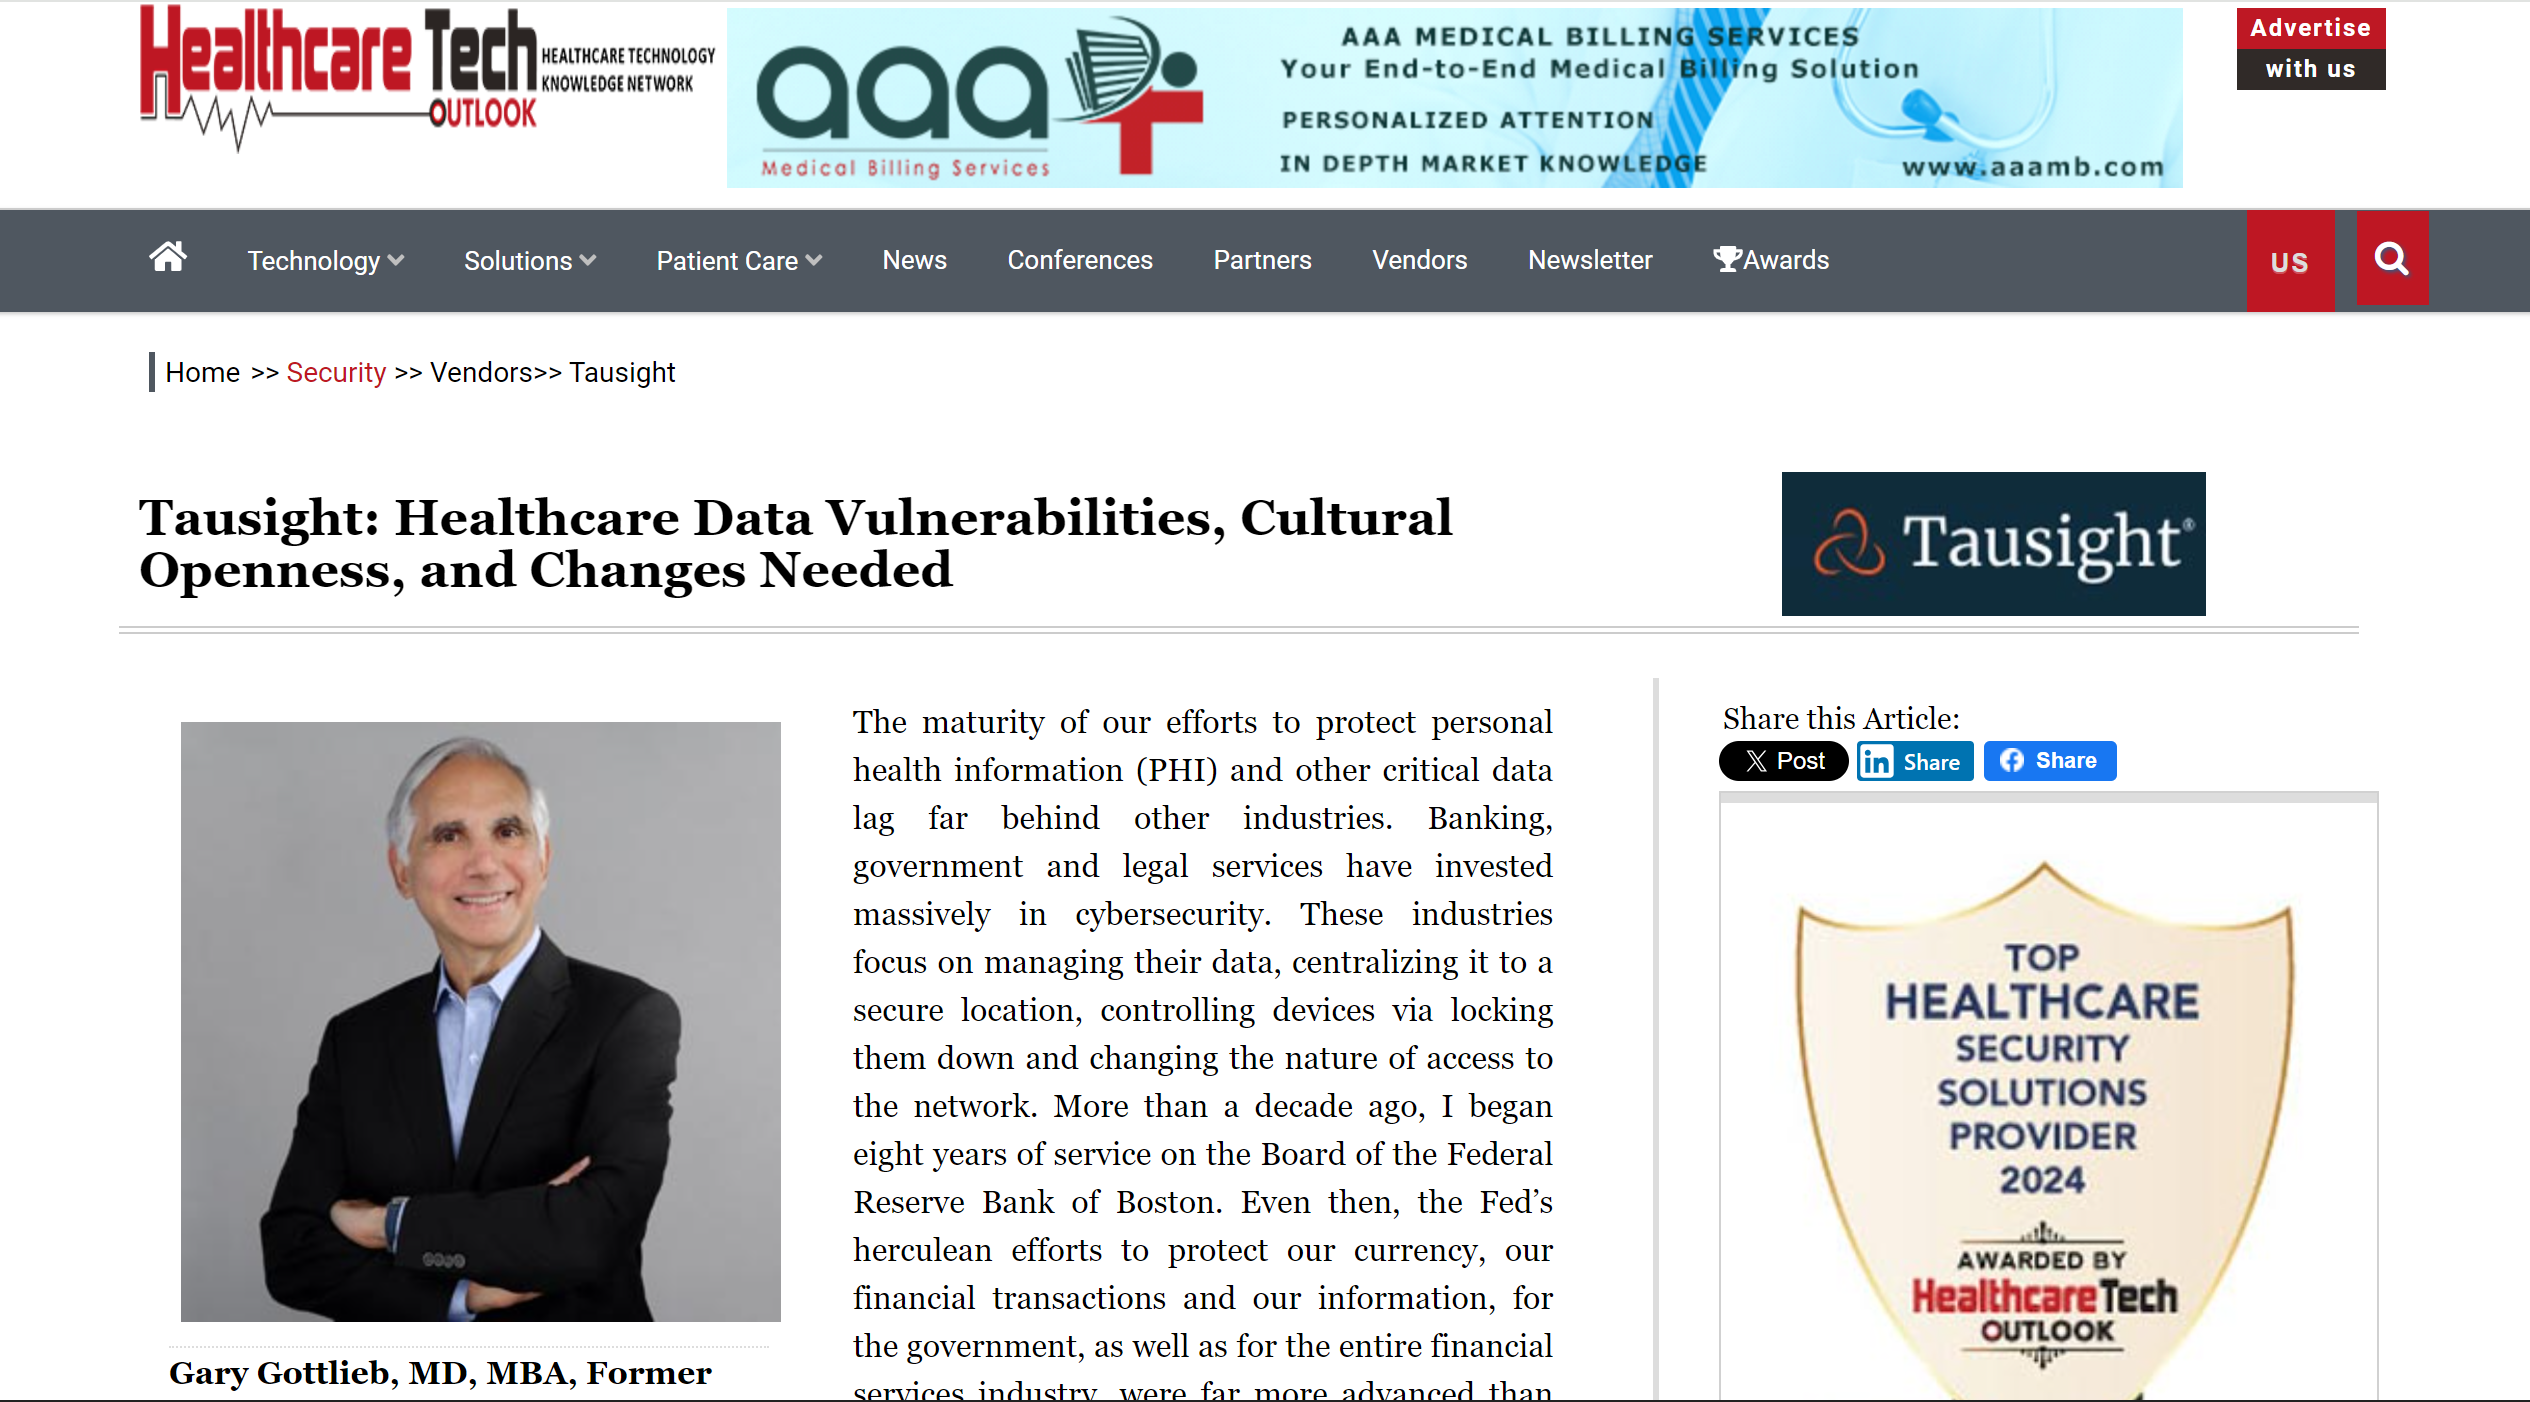 Healthcare Tech Outlook Gary Gottlieb contributory article: Healthcare Data Vulnerabilities, Cultural Openness, and Changes Needed